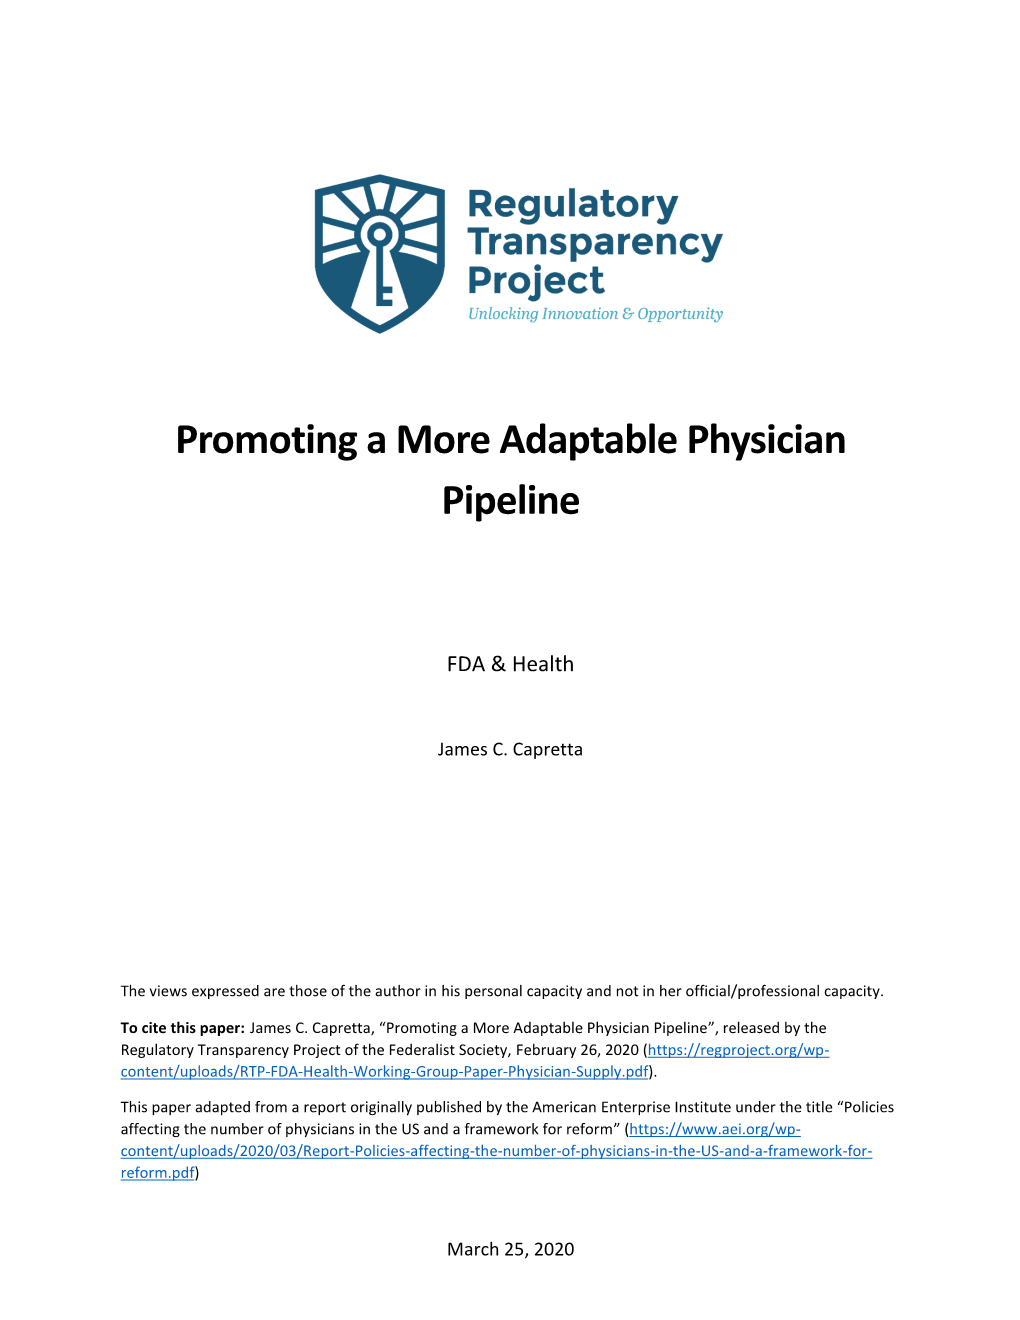 Promoting a More Adaptable Physician Pipeline